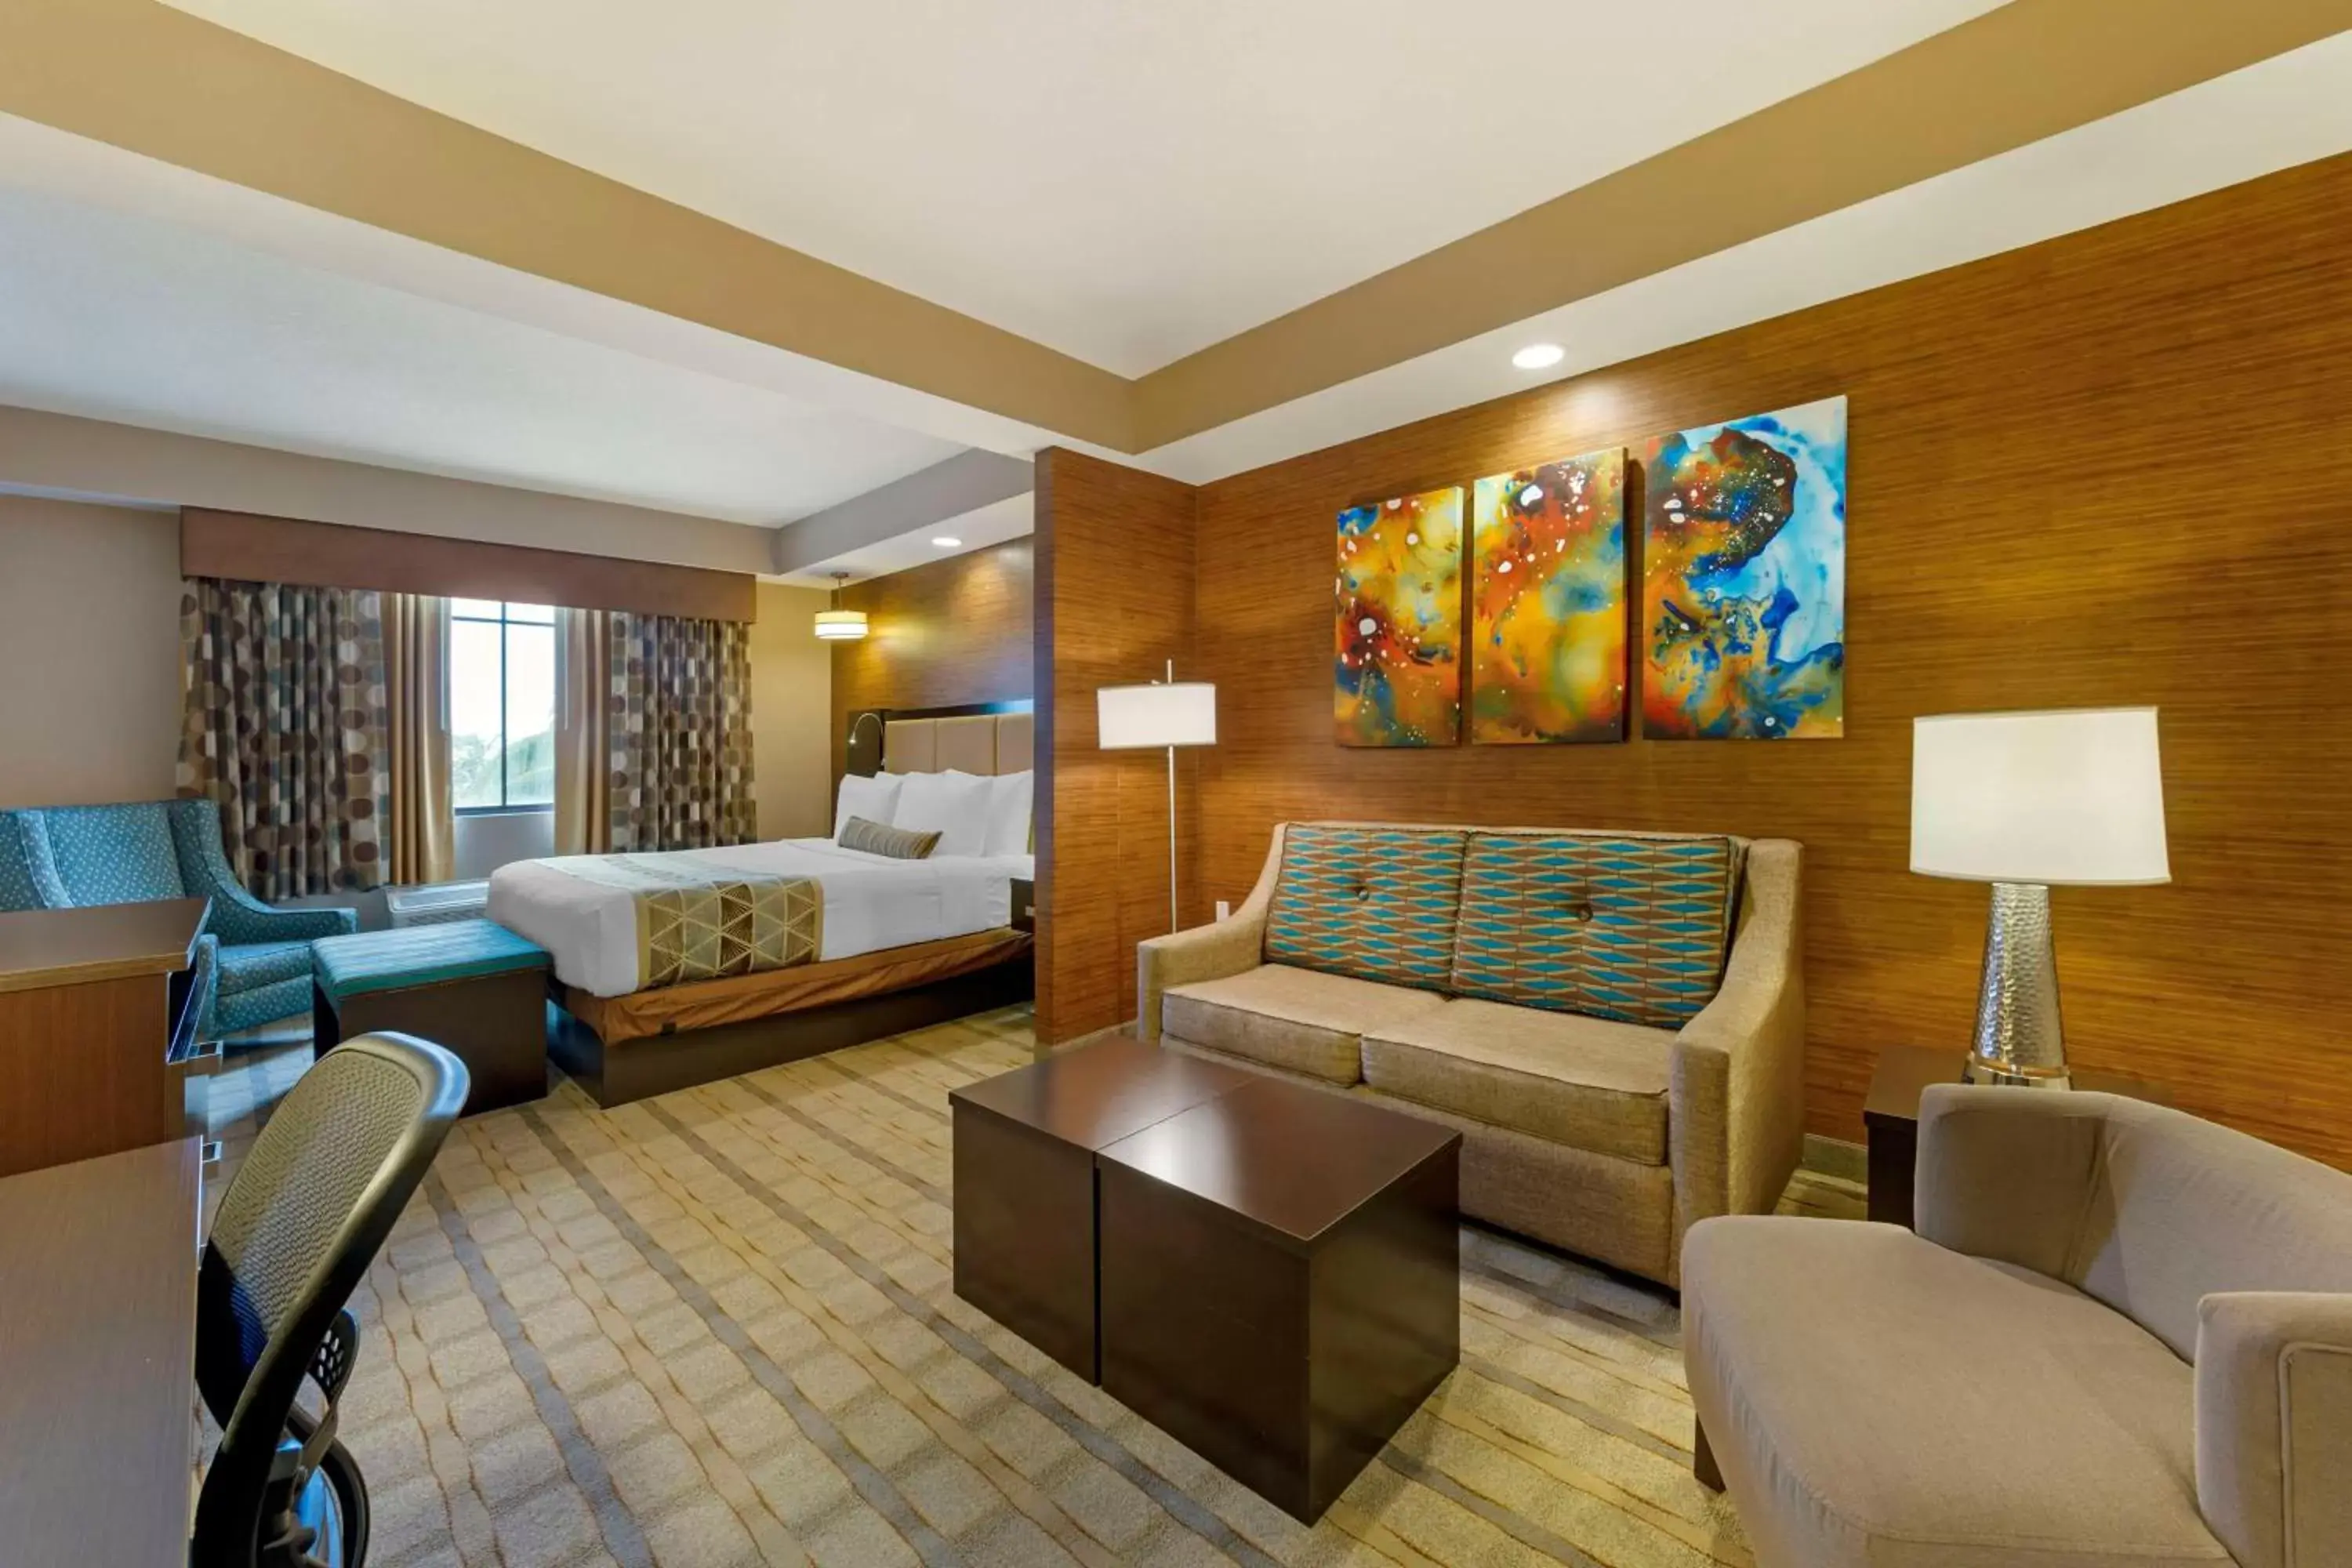 Bedroom in Best Western Plus Miami Executive Airport Hotel and Suites